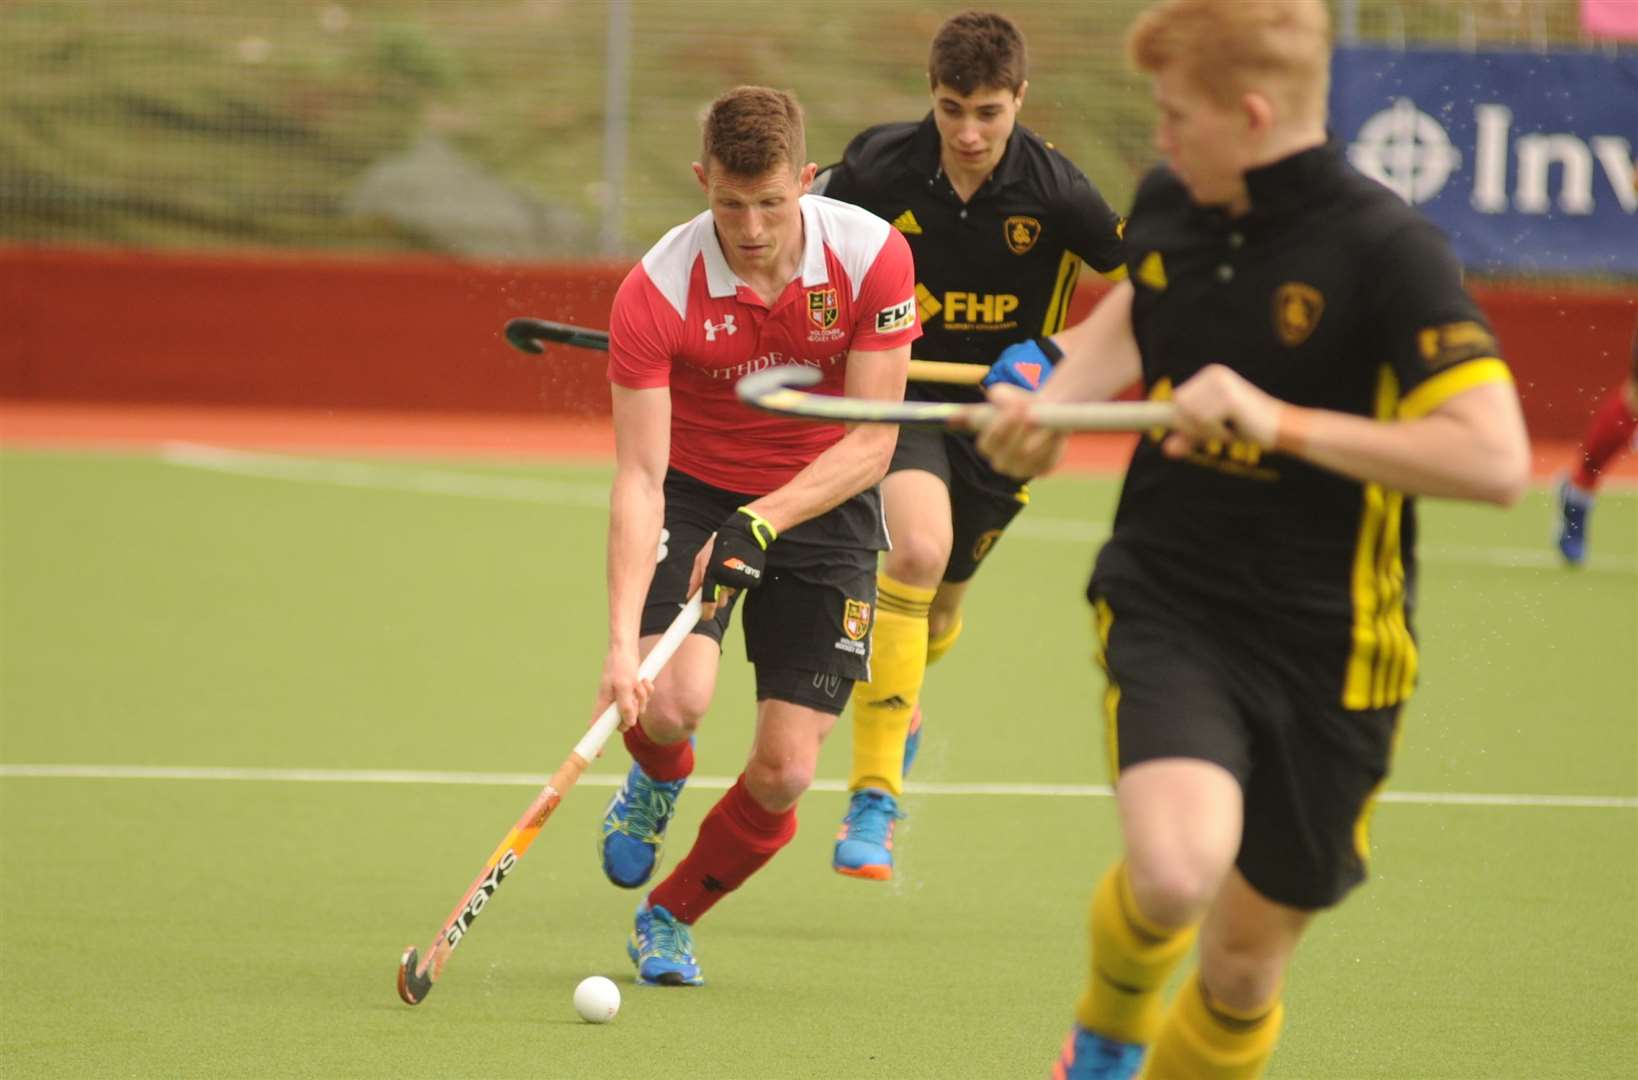 Sam Ward, English field hockey player, has made a sizeable donation to the boy's JustGiving page. Picture: Steve Crispe